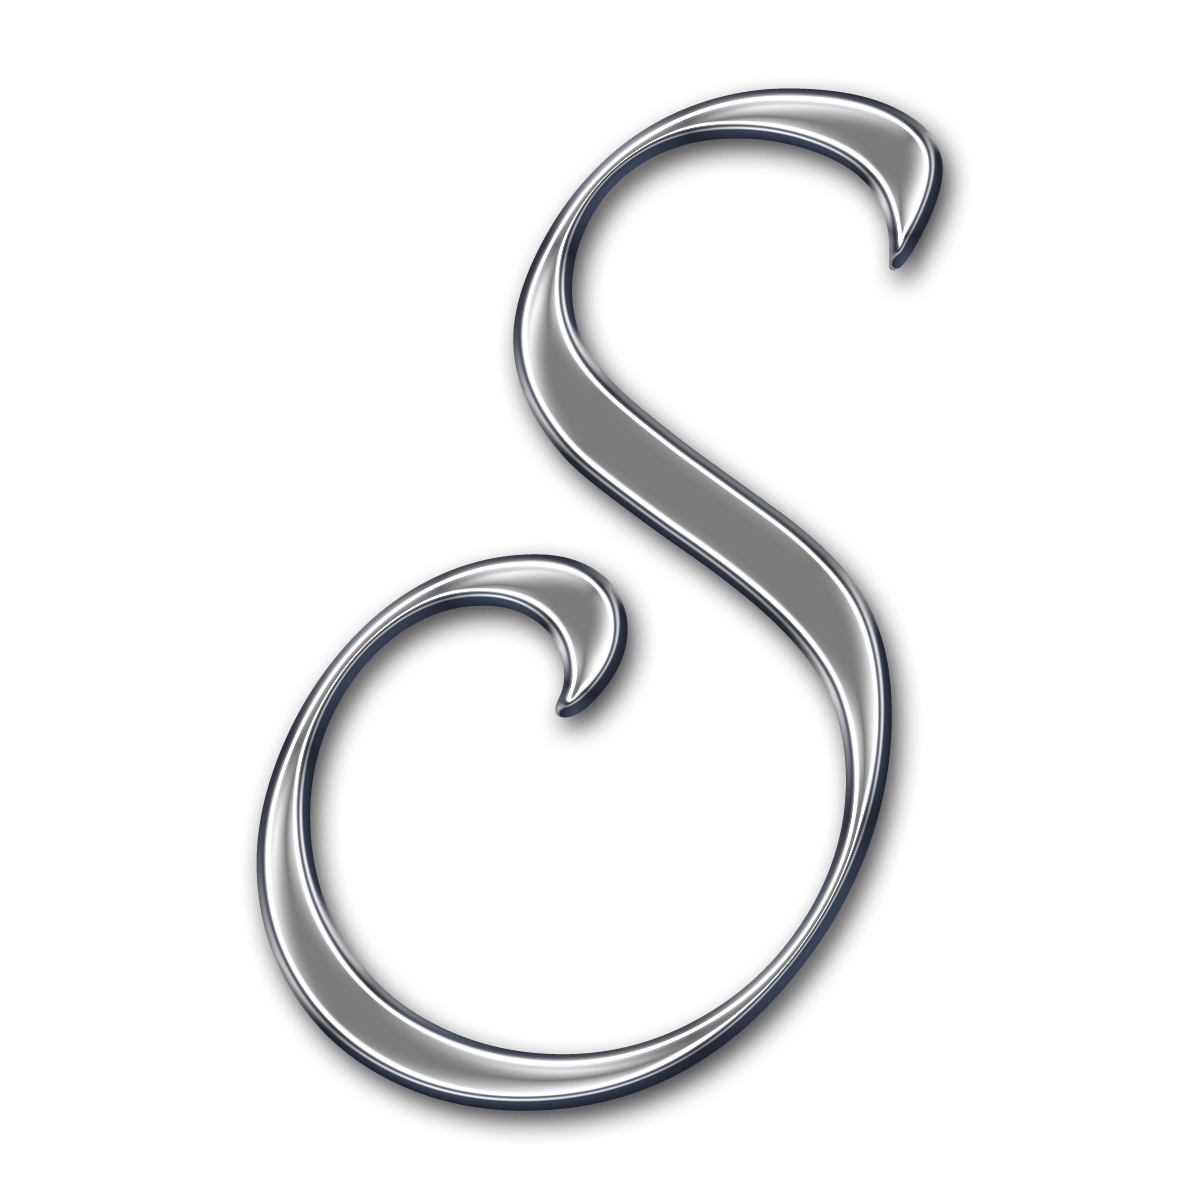 S Letter Logo Wallpapers HD - Wallpaper Cave